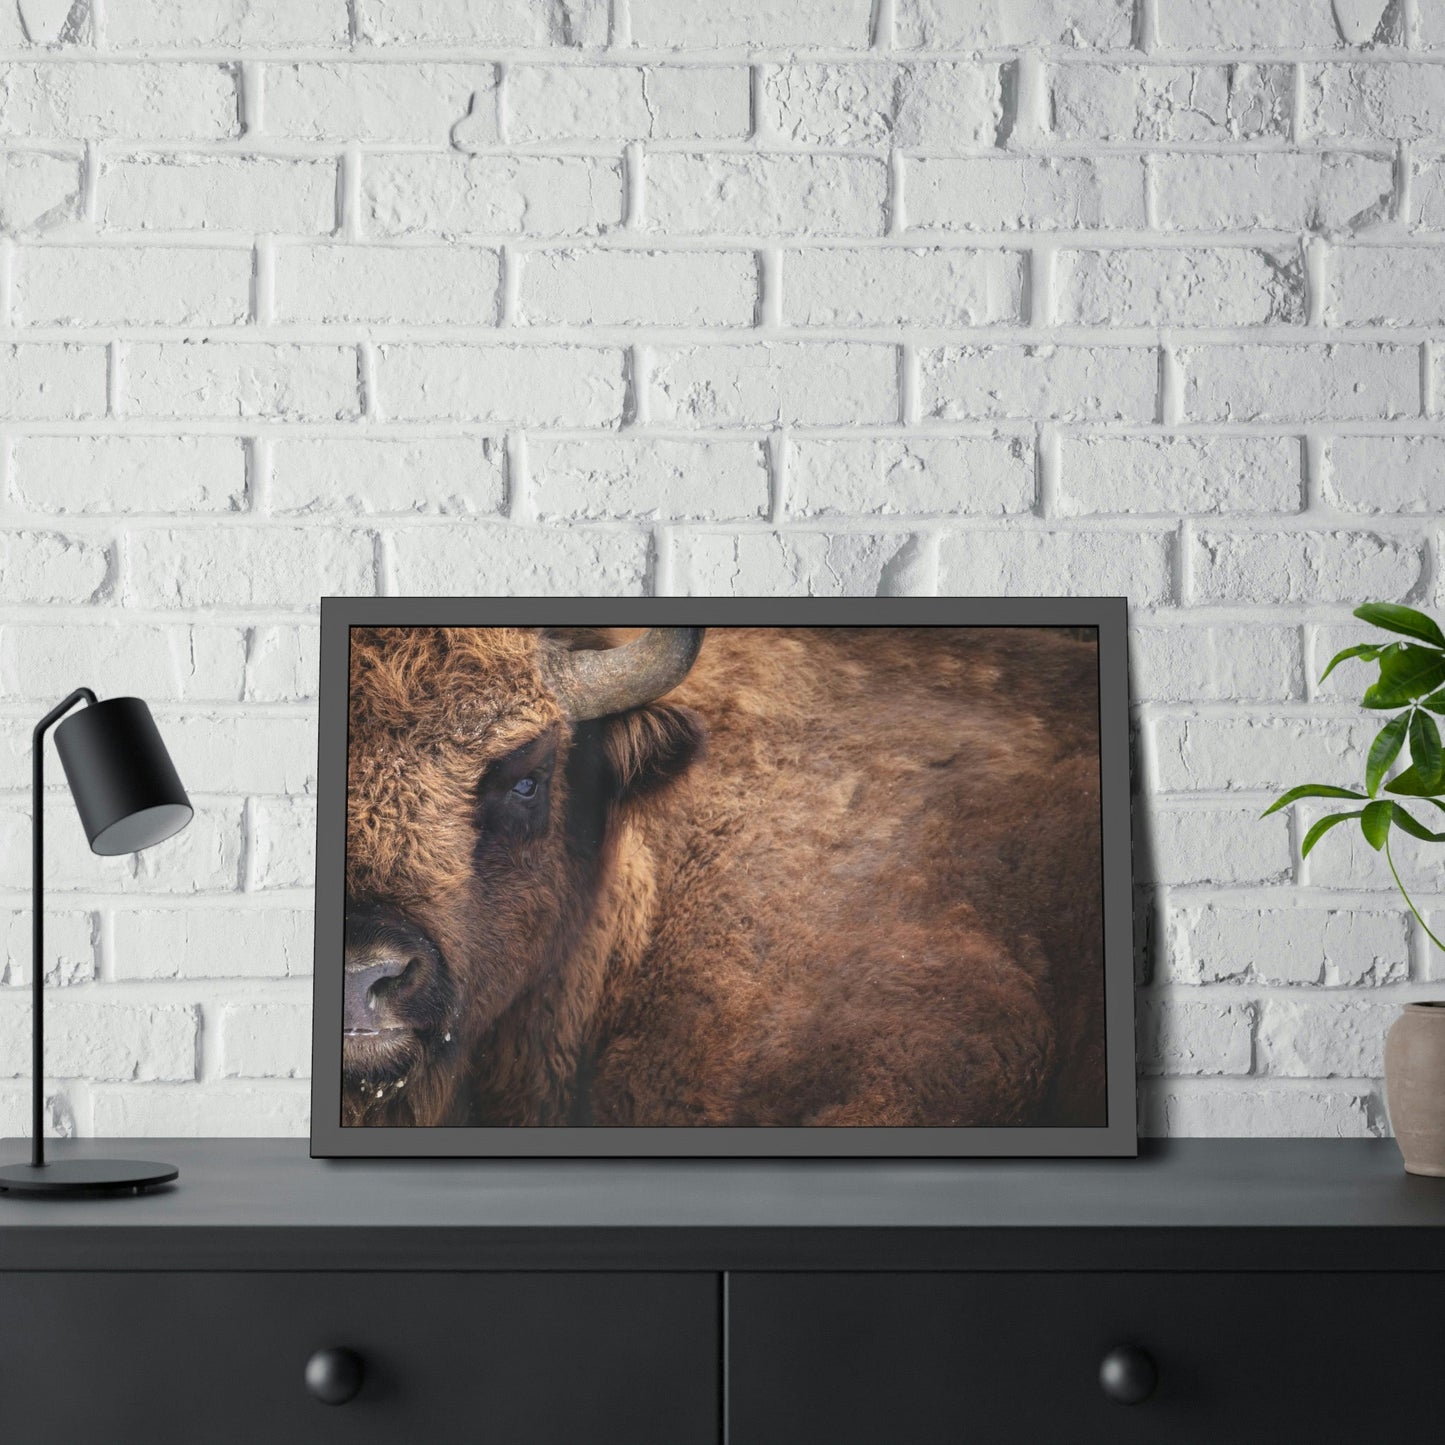 Artistic Bull Illustration: Natural Canvas and Poster Prints